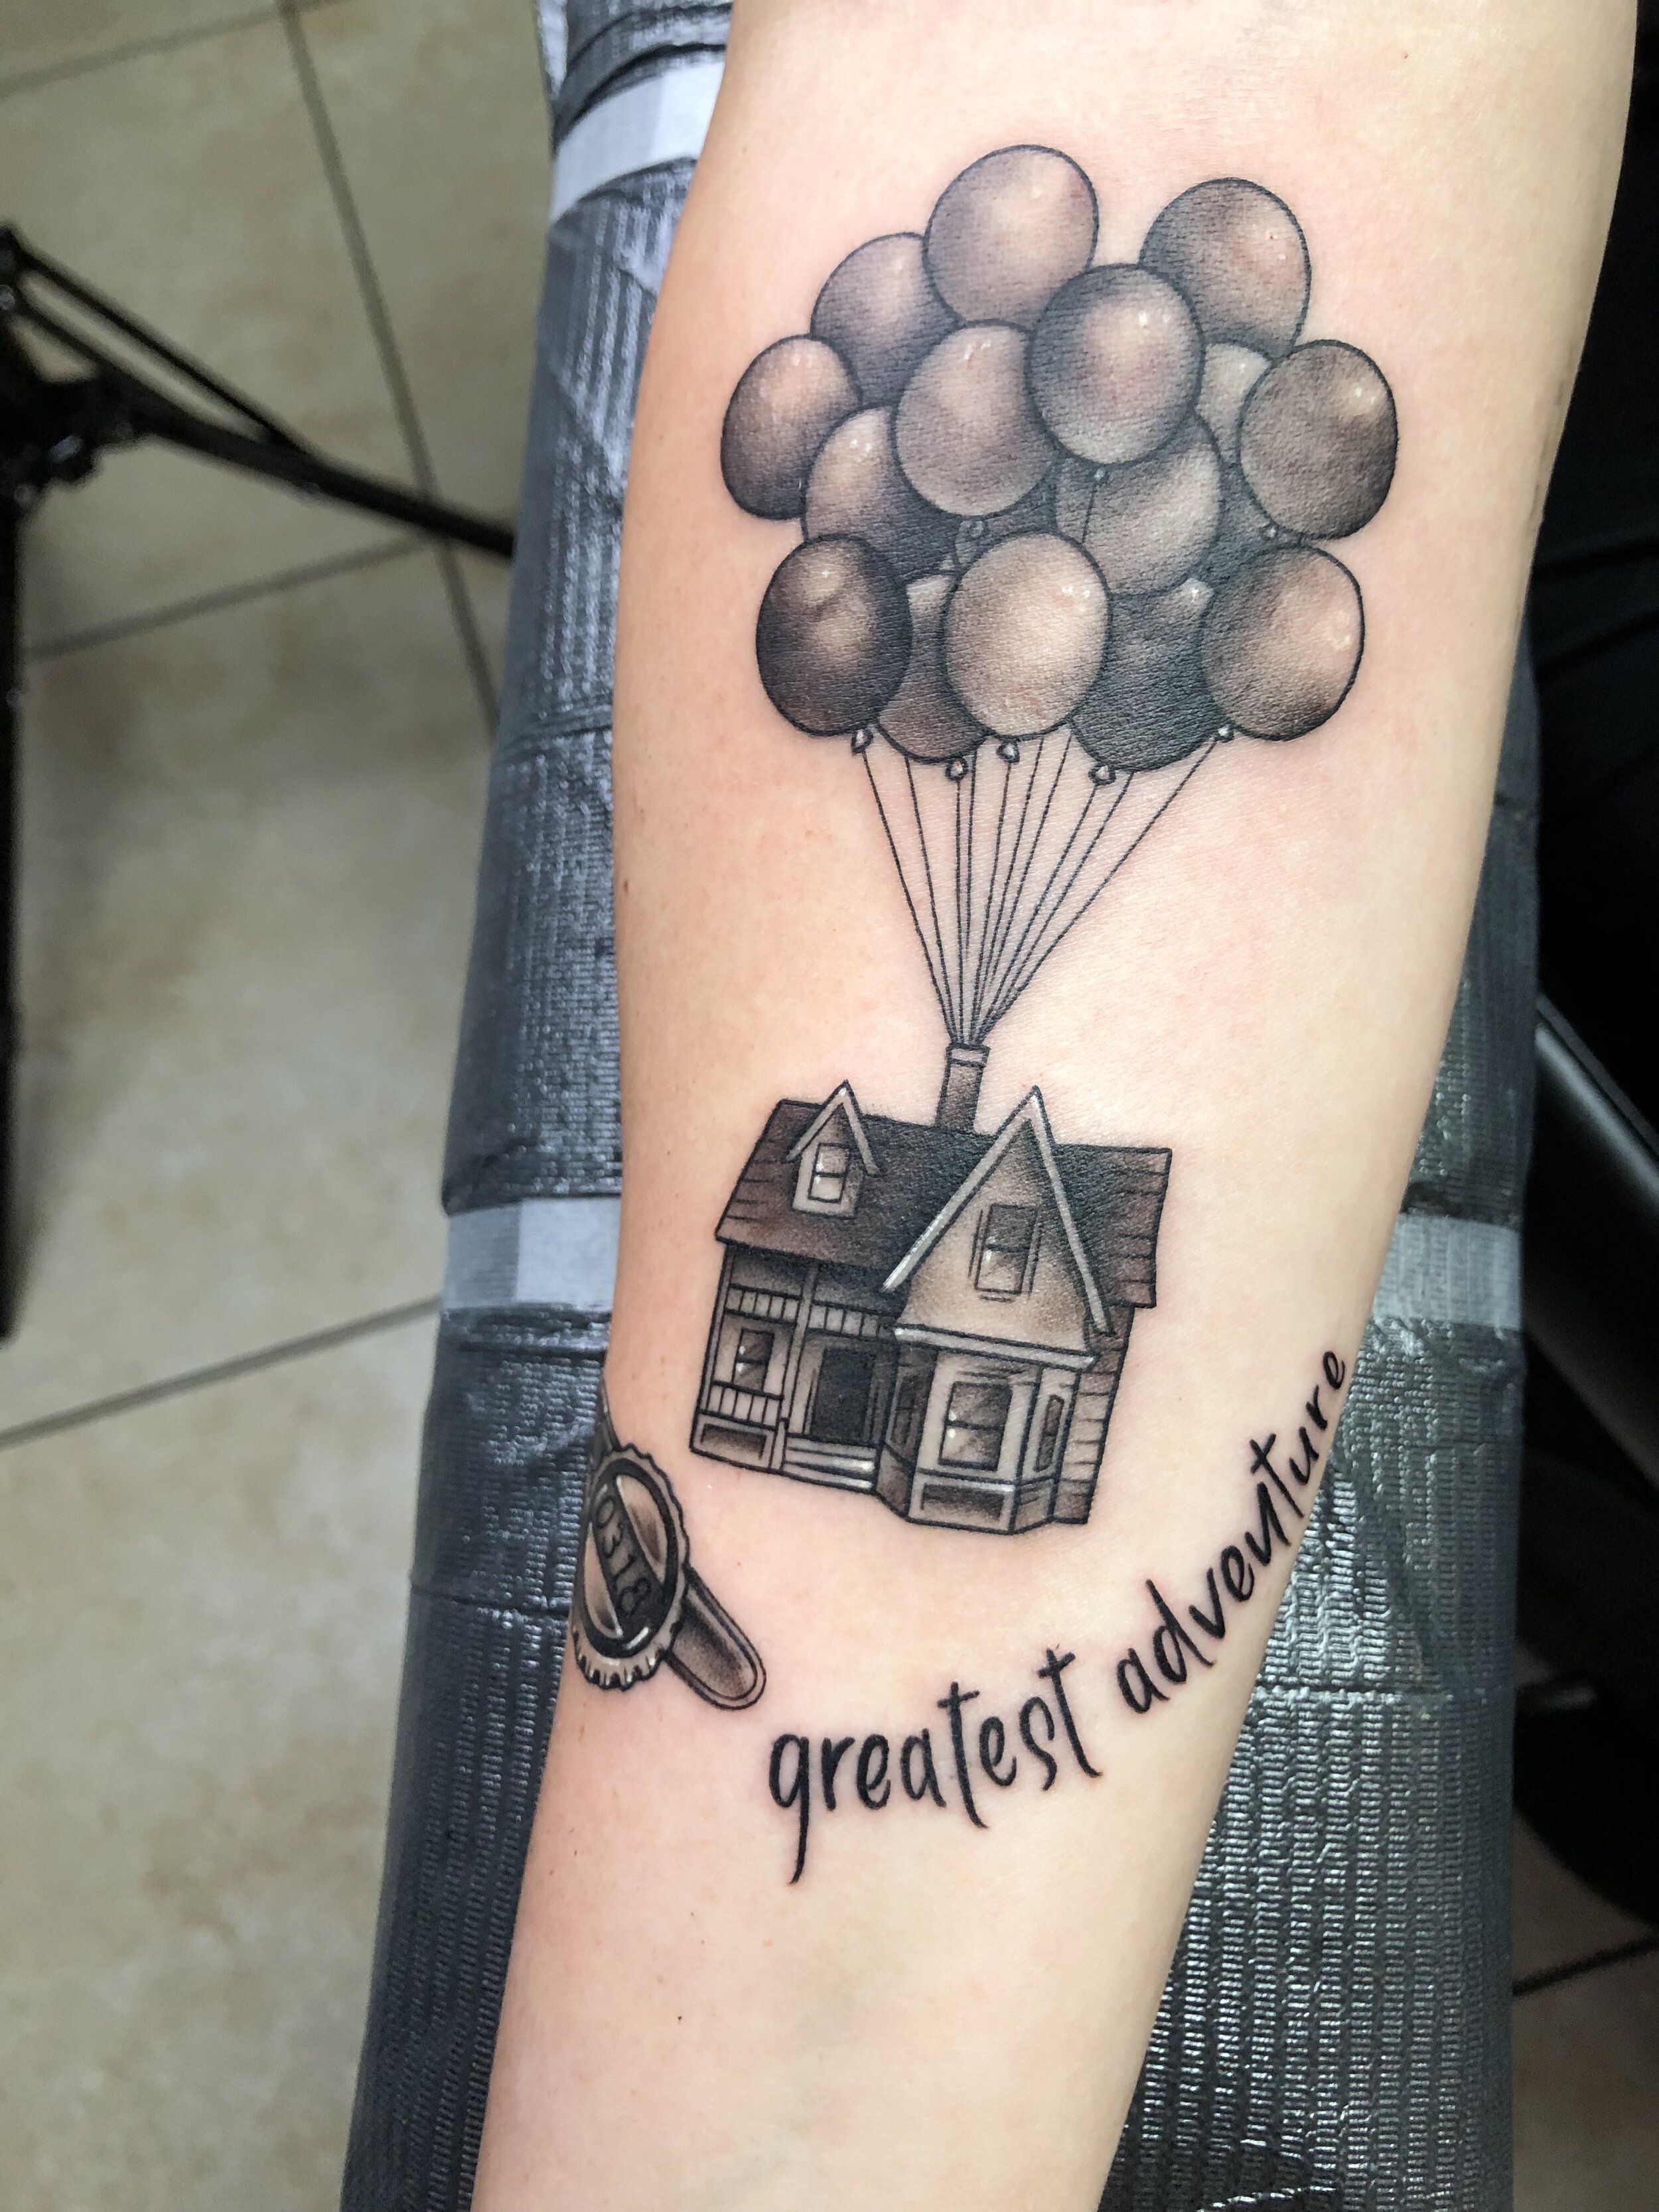 Scotty Sire on Instagram got a new tattoo it was really hard to get a  photo from a flattering angle the stay up in the balloons is a play on the  movie